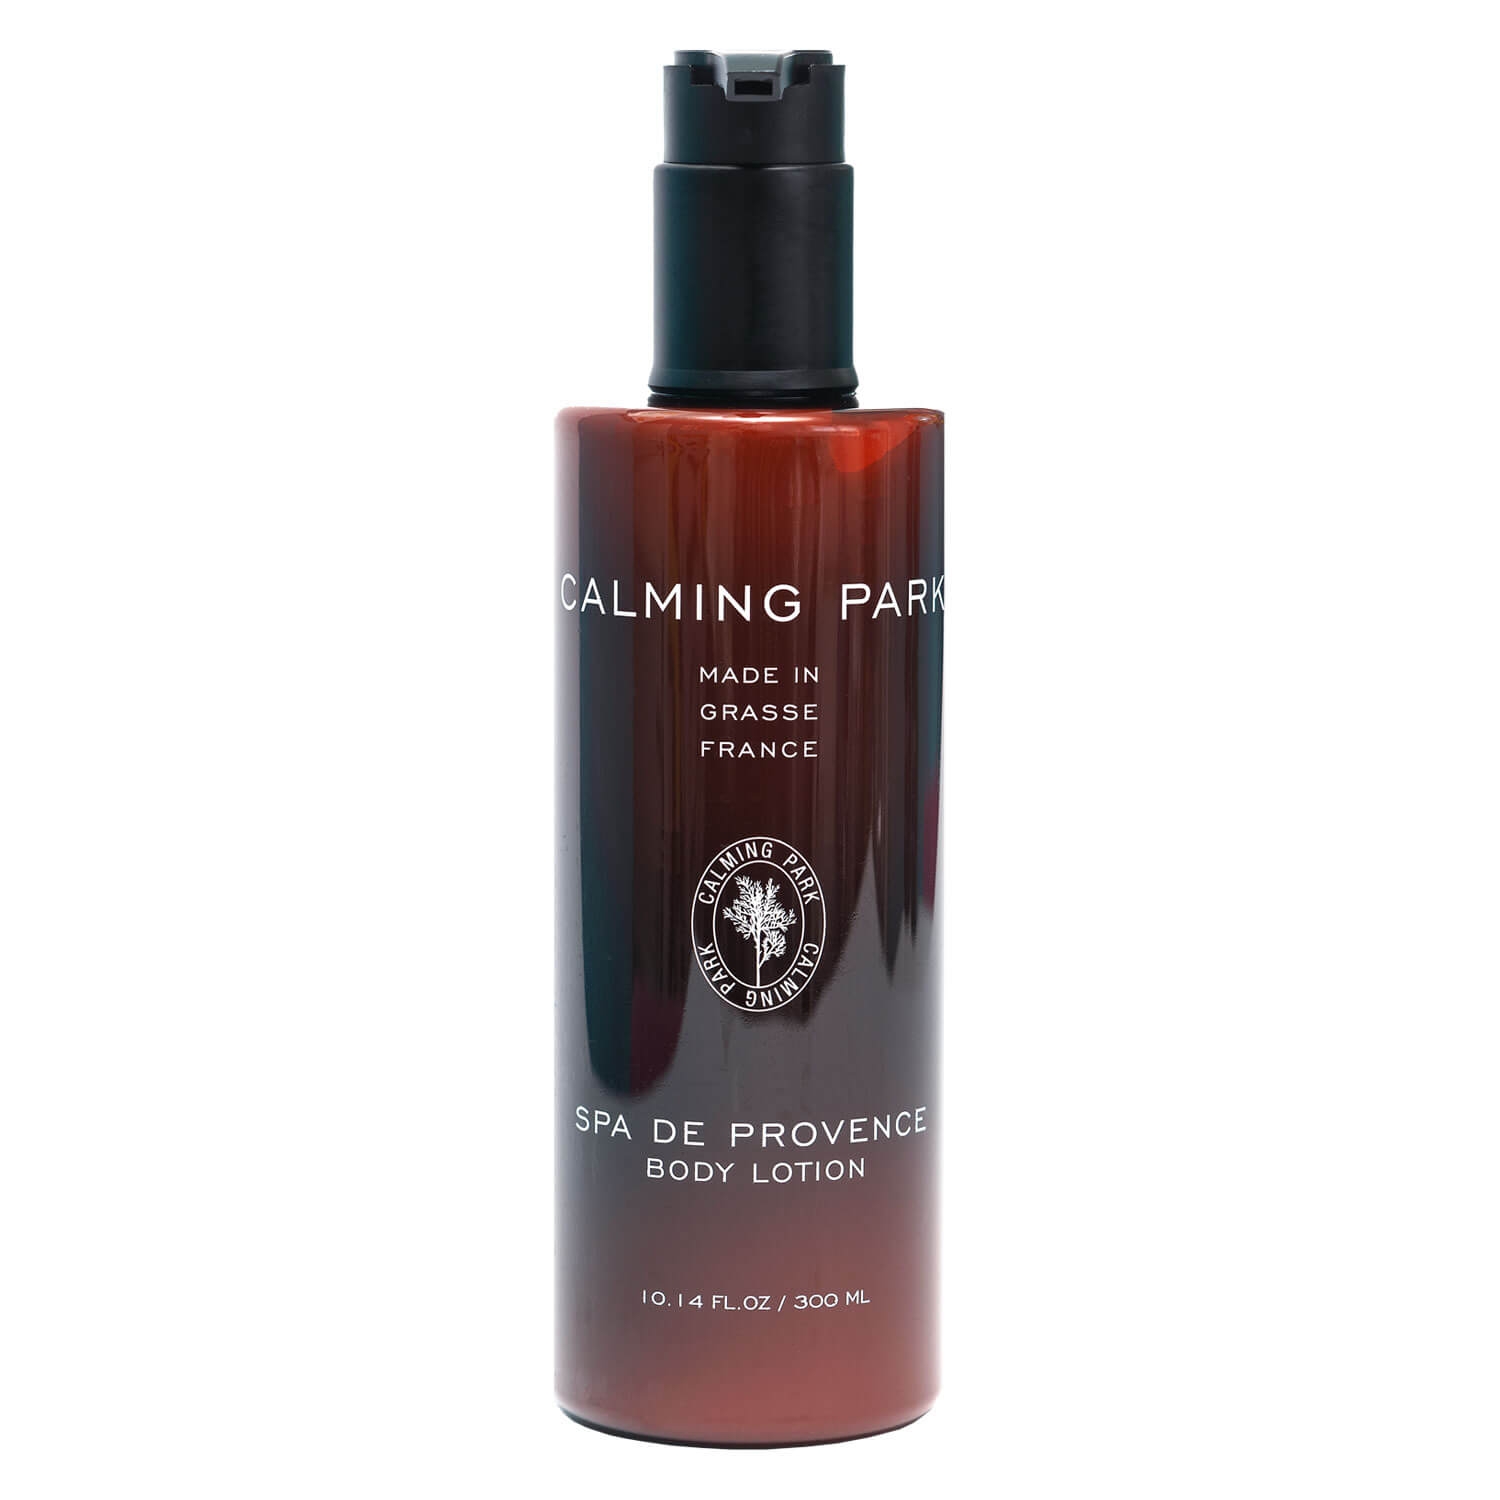 Product image from Calming Park - Spa De Provence Body Lotion